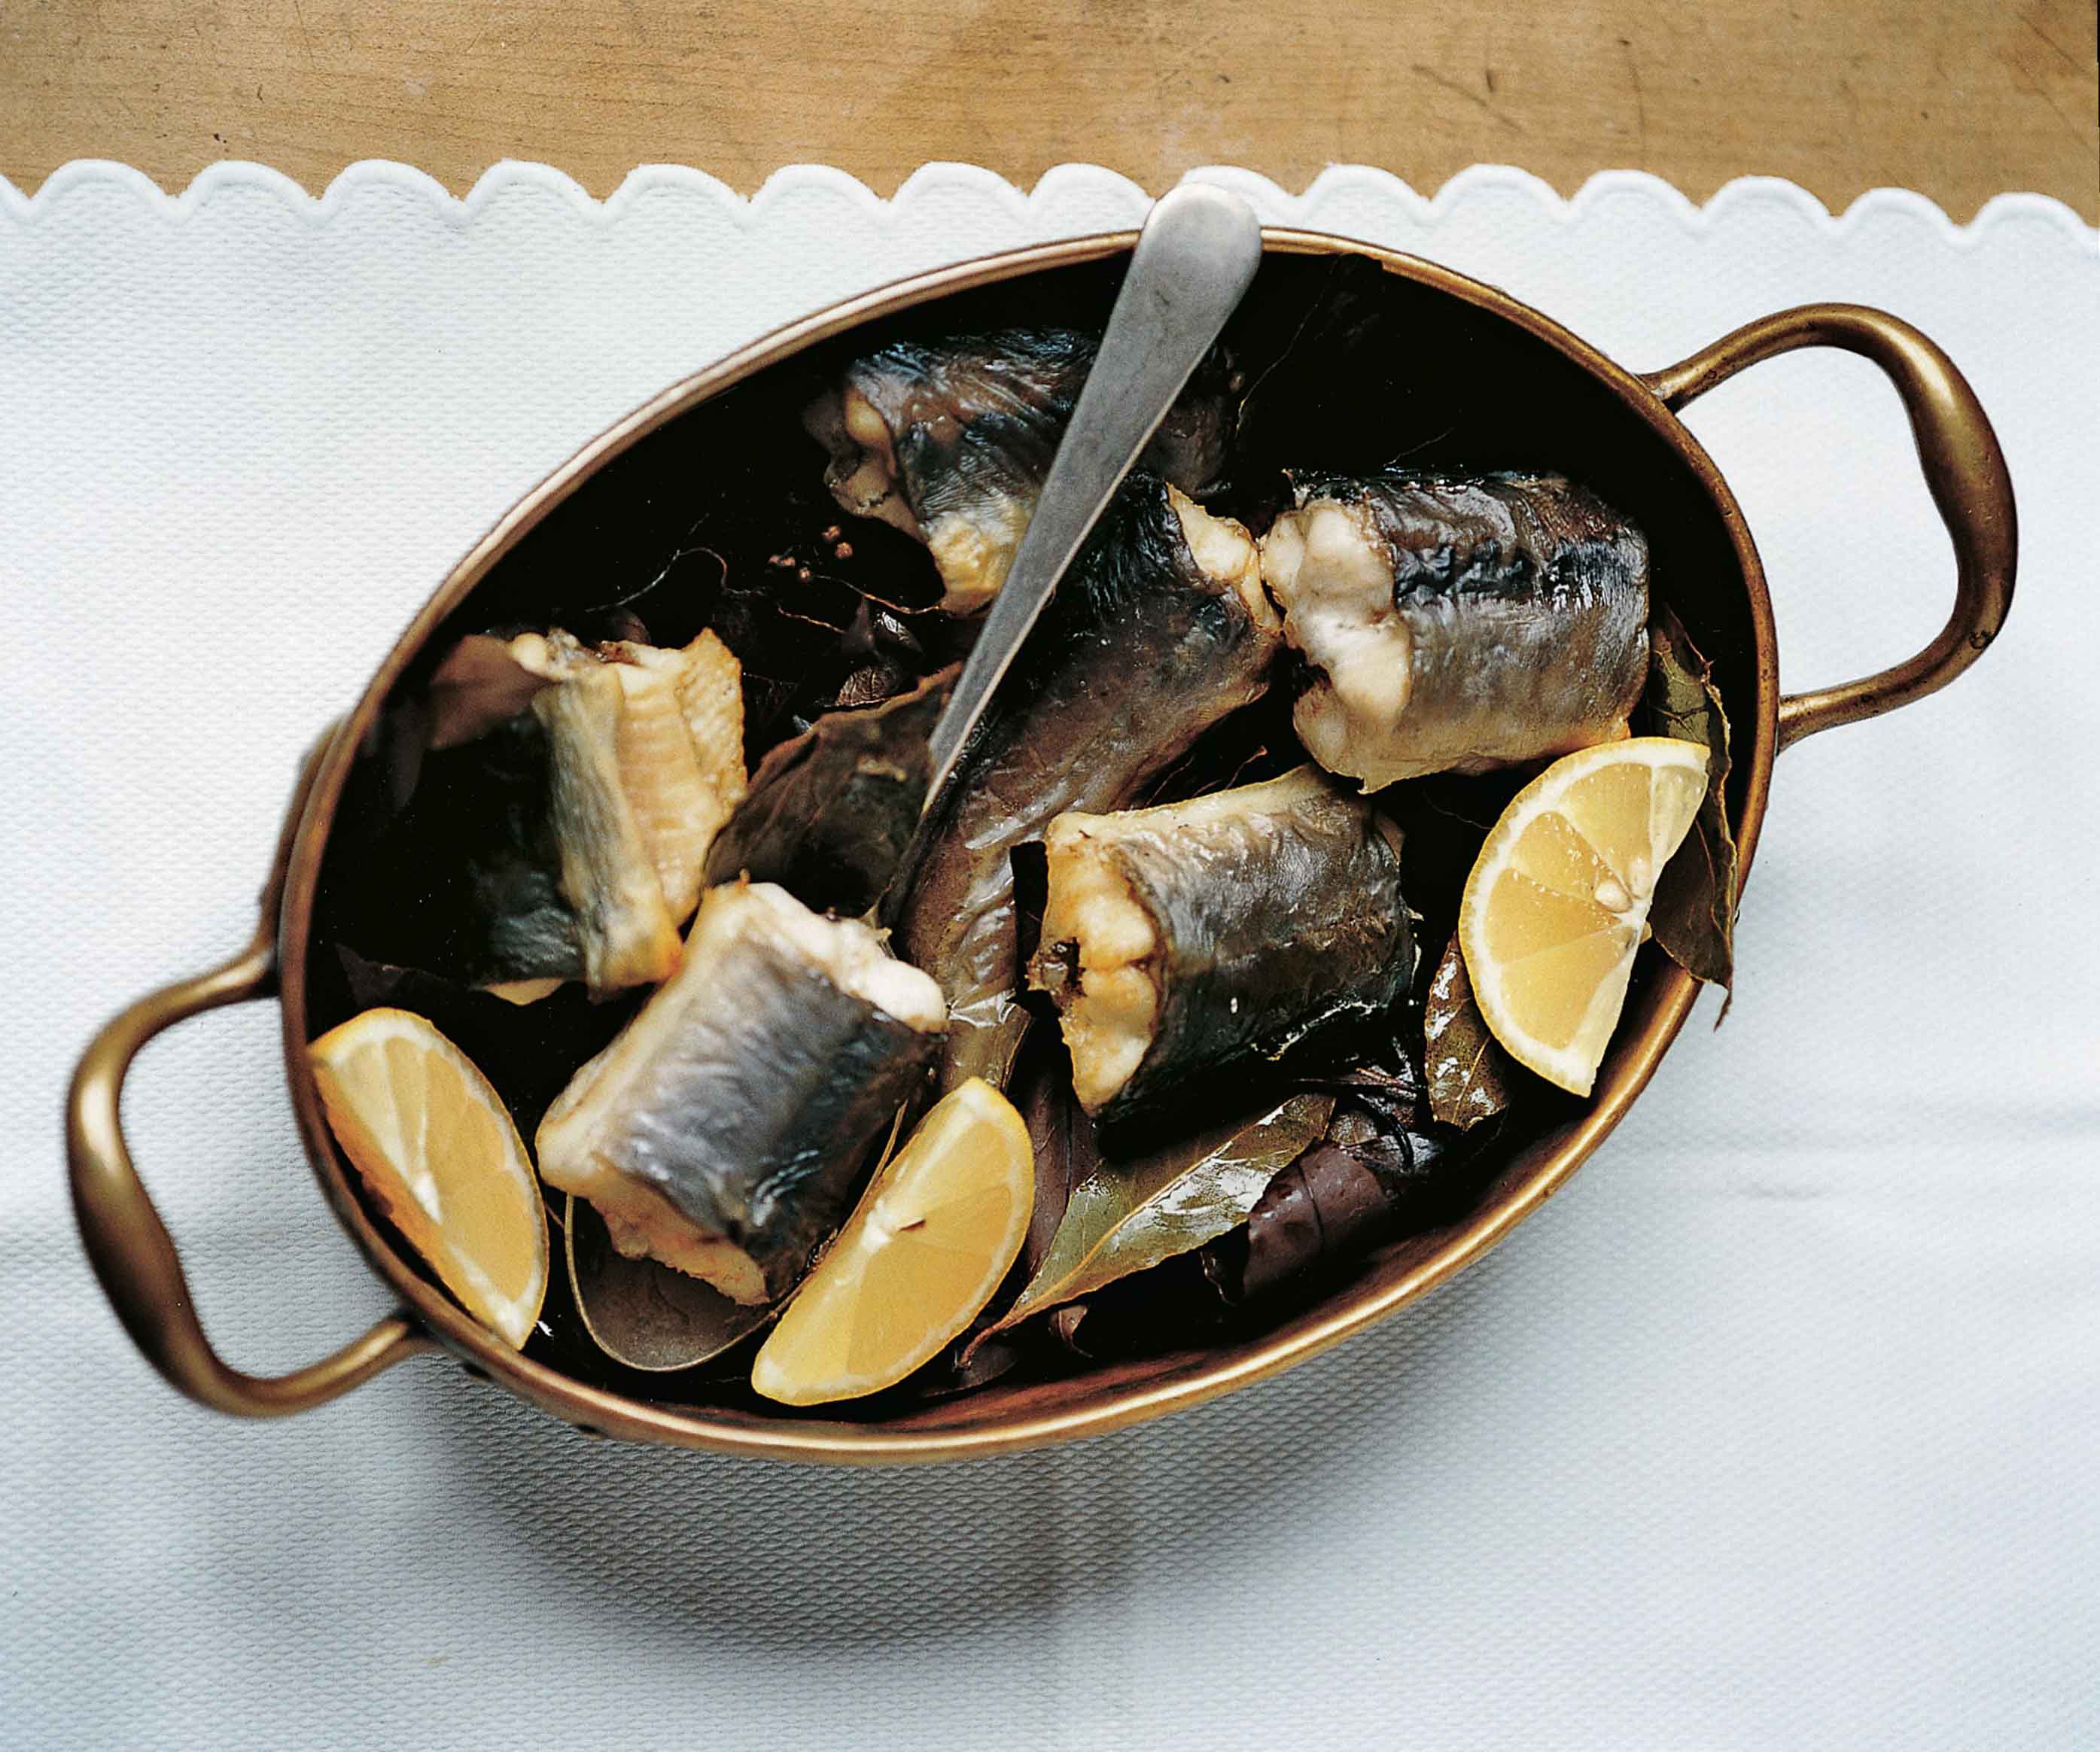 Eel baked with bay leaves